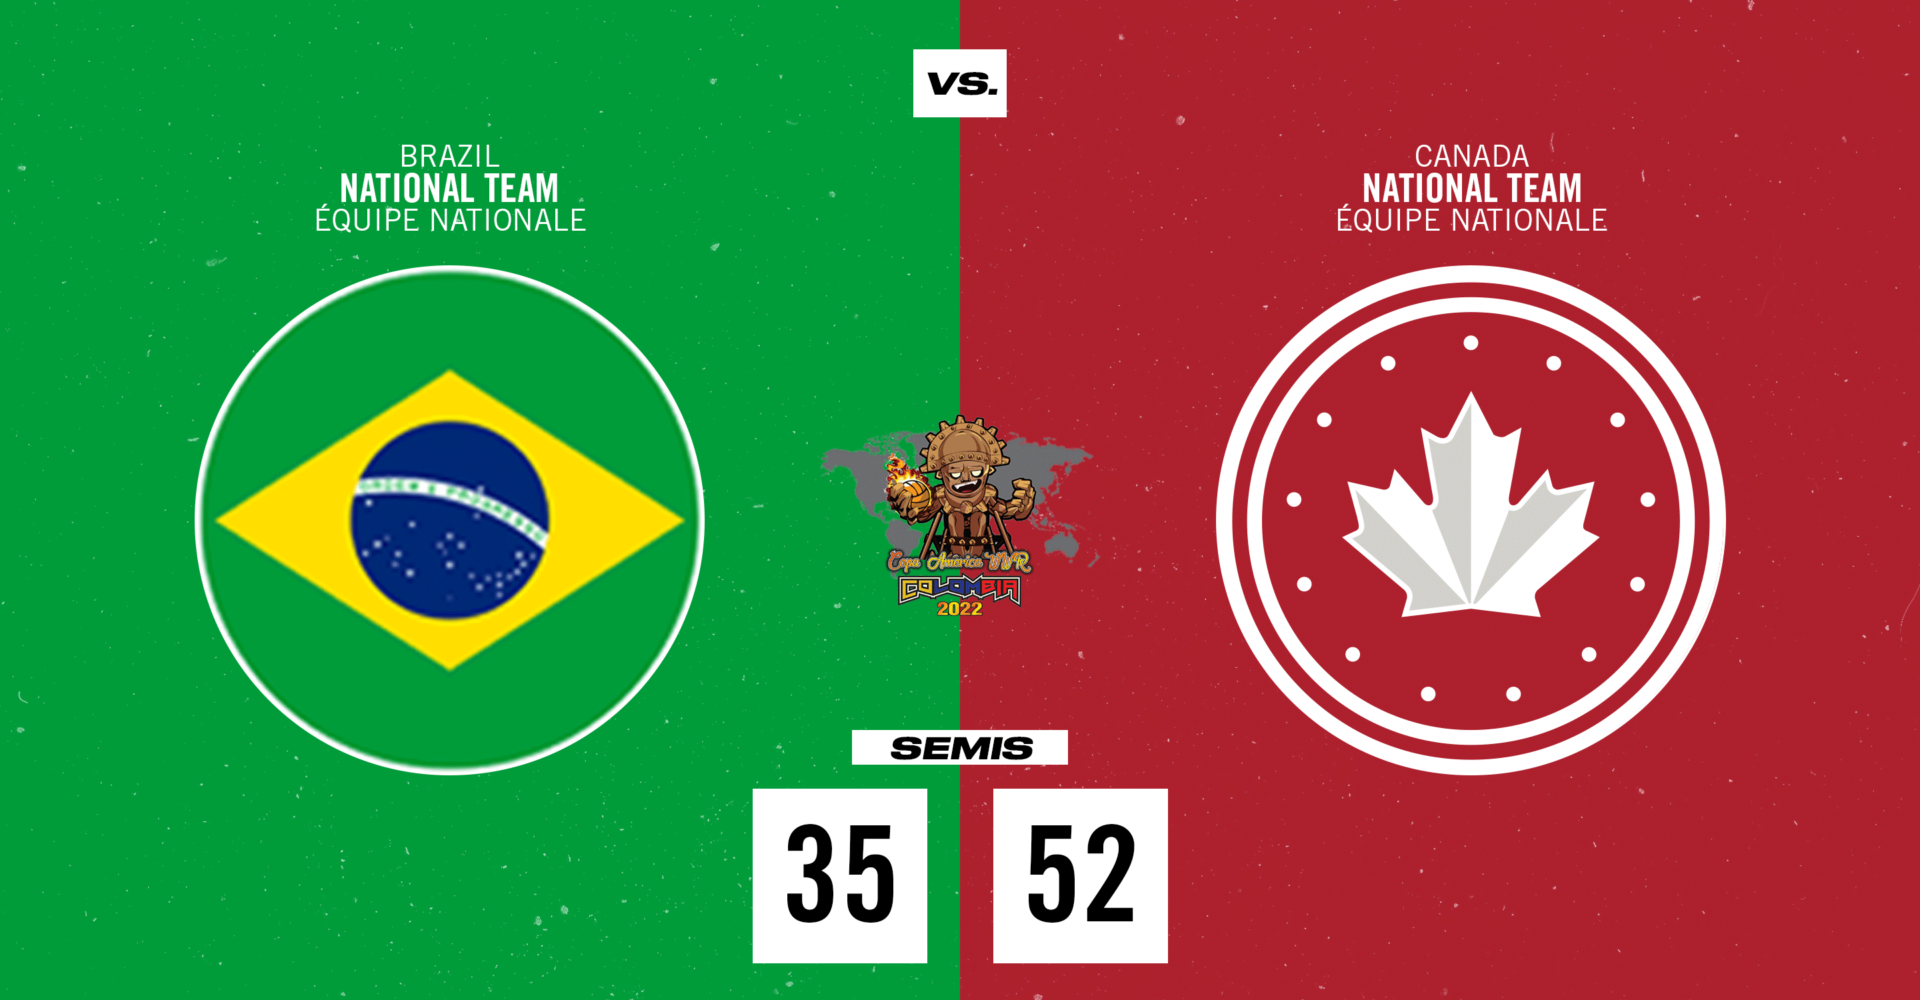 Canada Advances to Finals after 52-35 Win over Brazil